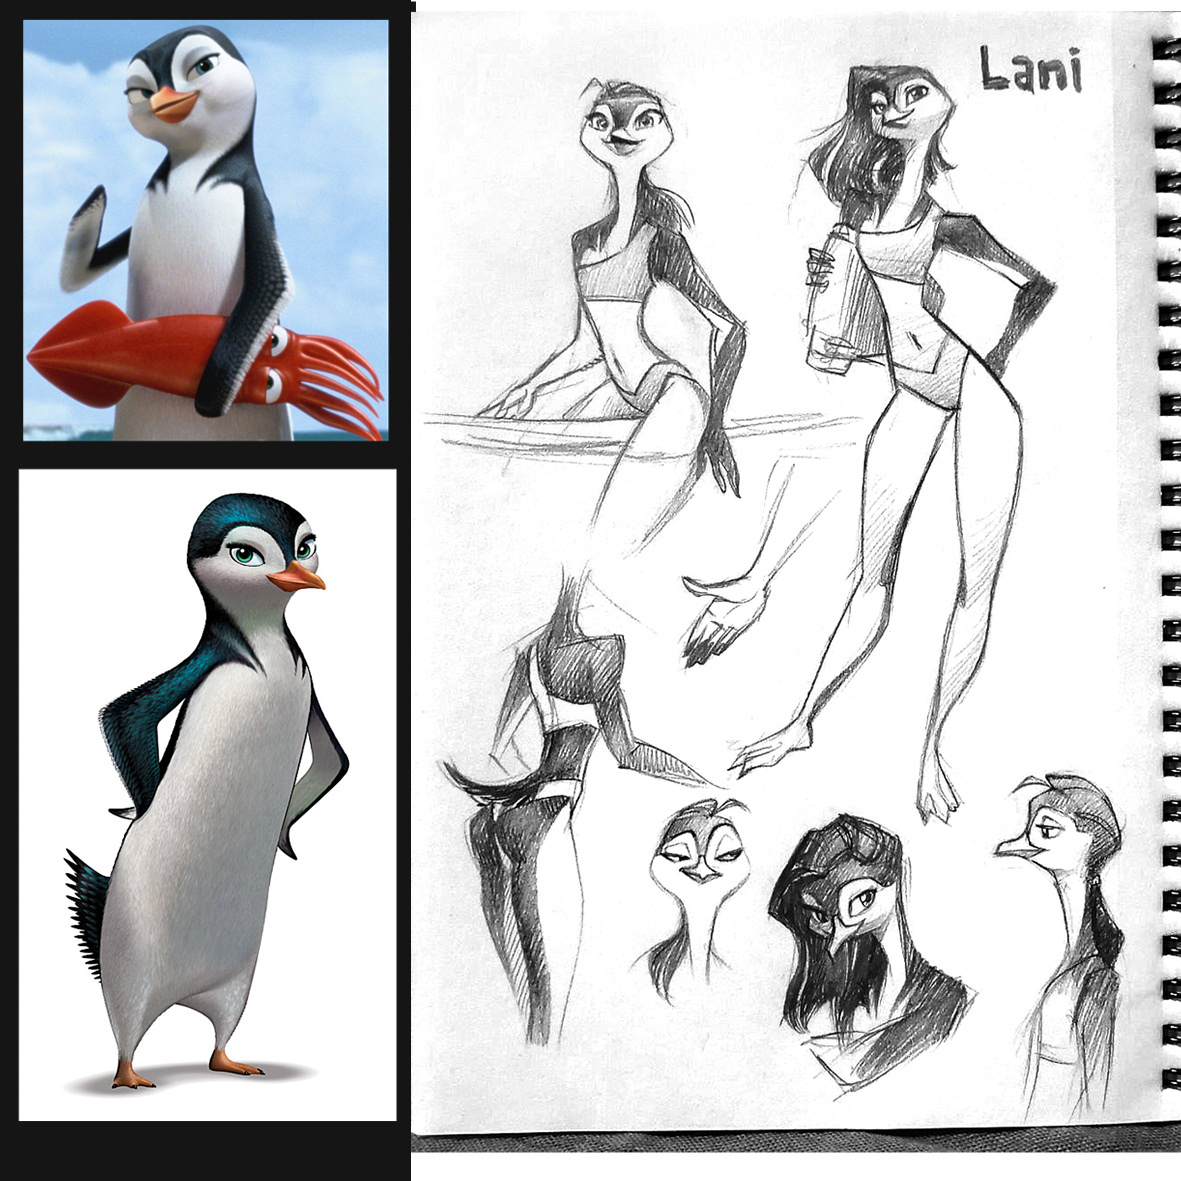 My version of Lani from "Surf's up"

#holivi #sketch #sketchbook #bird #anthro #penguin https://t.co/eeHae3FrbA